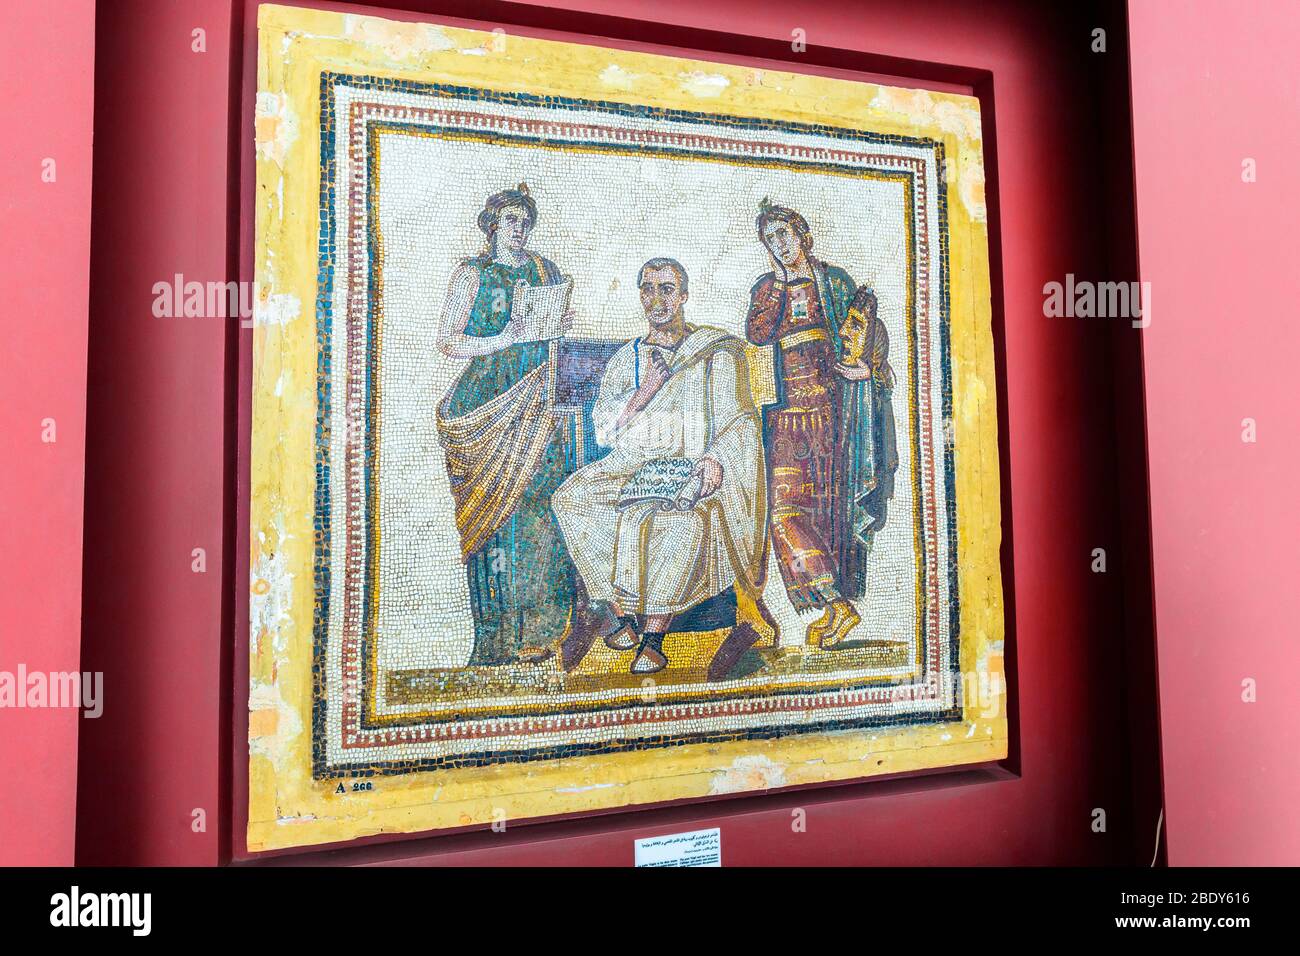 Virgil with Muses Clio and Melpomene on a roman mosaic. Stock Photo